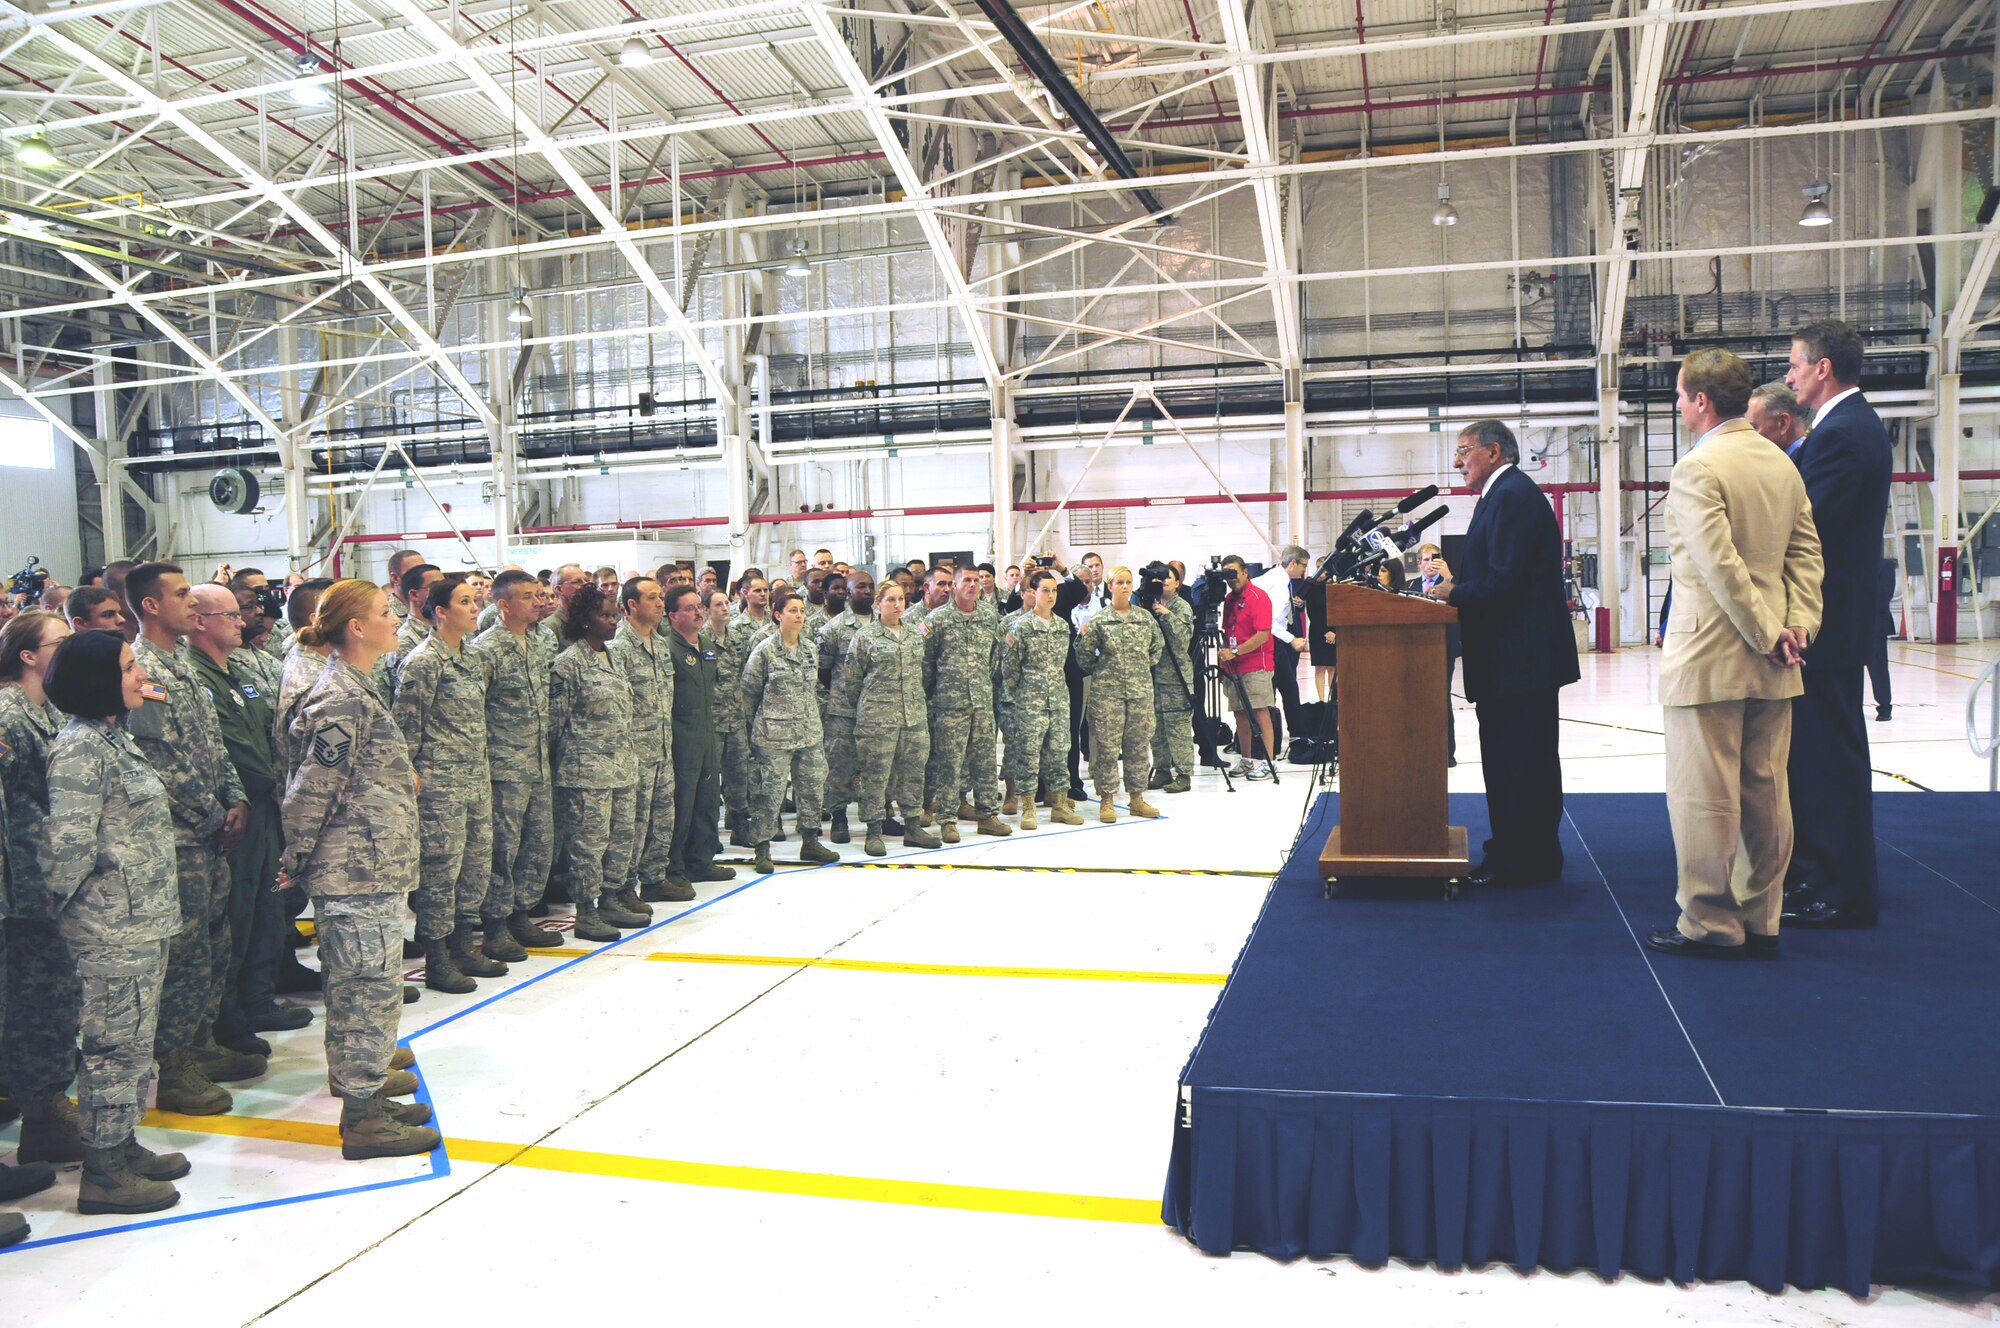 The Secretary of Defense Honorable Leon E. Panetta visits the Niagara Falls Reserve Station on Aug. 9, 2012. He thanked the Guard and Reserve Airmen, Soldiers and civilian employees for their service. (U.S. Air Force Photo/Senior Master Sgt. Ray Lloyd)